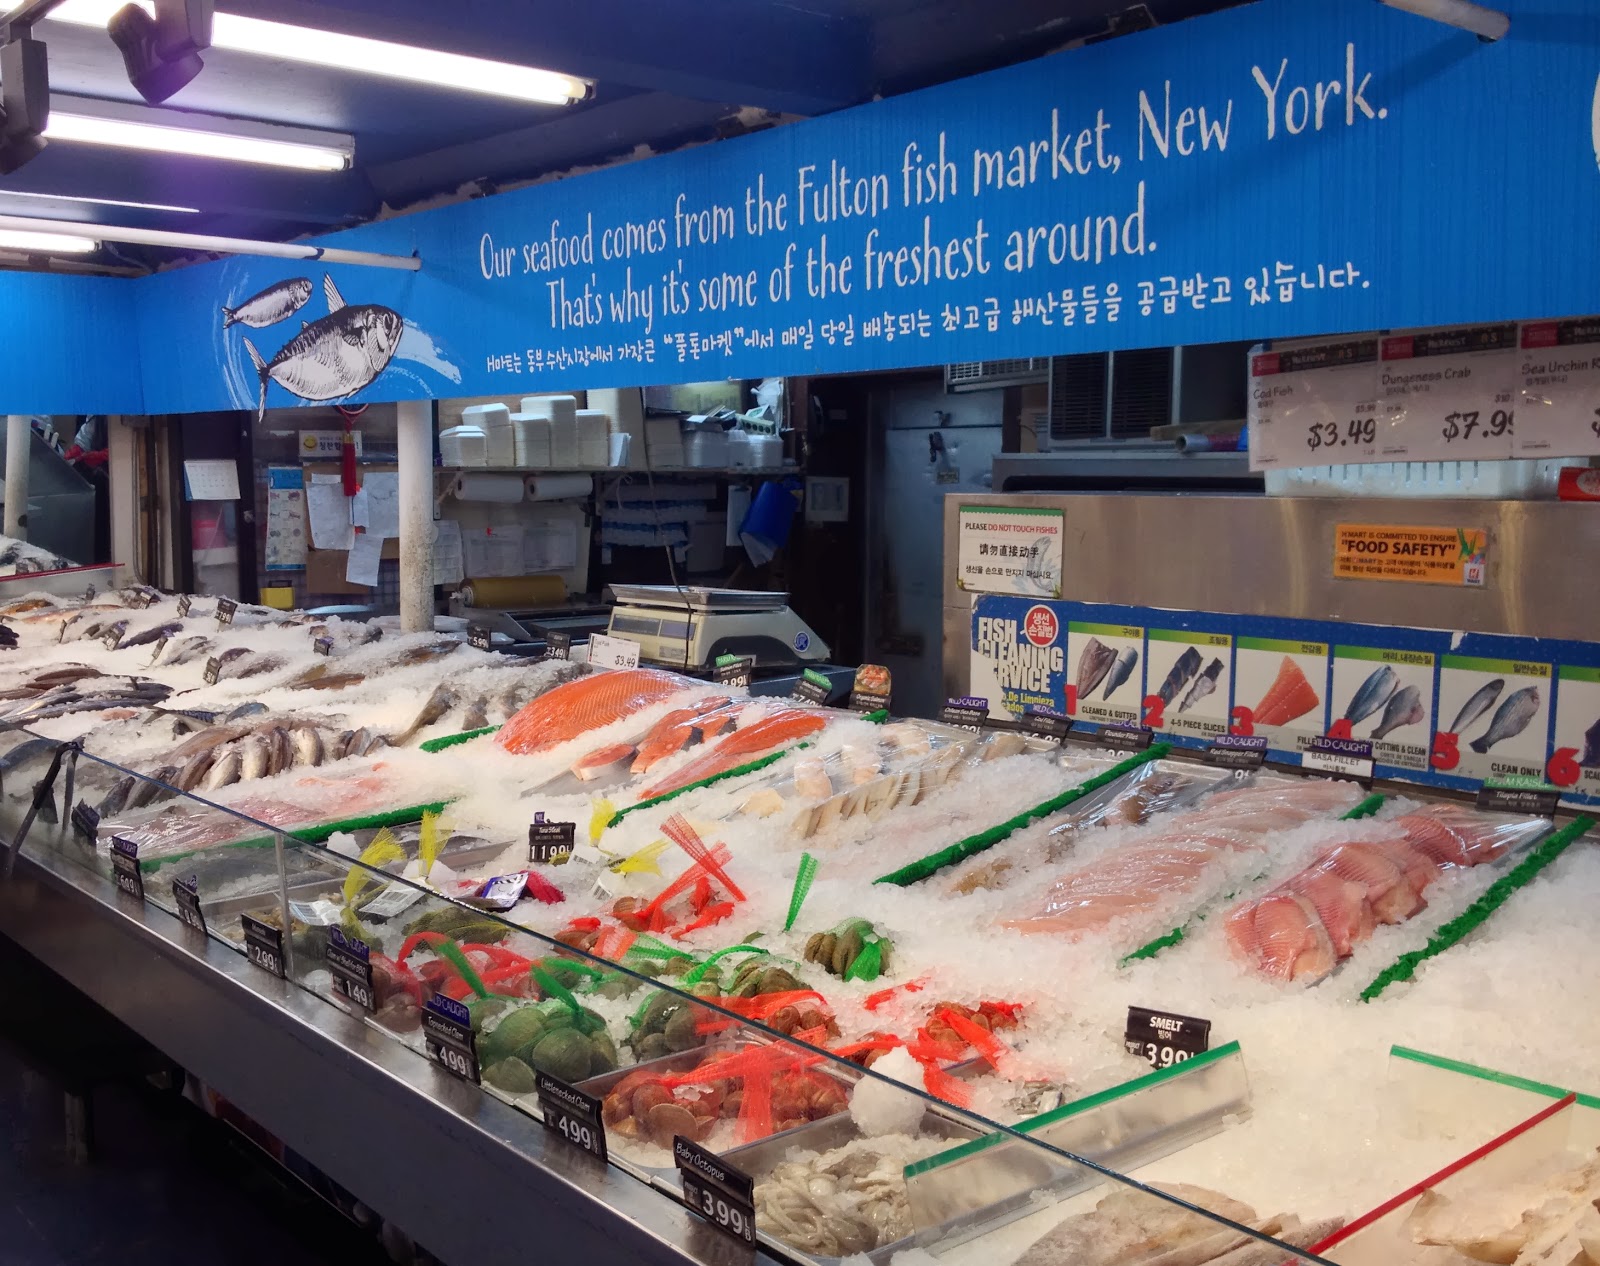 Do You Really Know What You're Eating?: At H Mart, the sea bass doesn't  pass the smell test